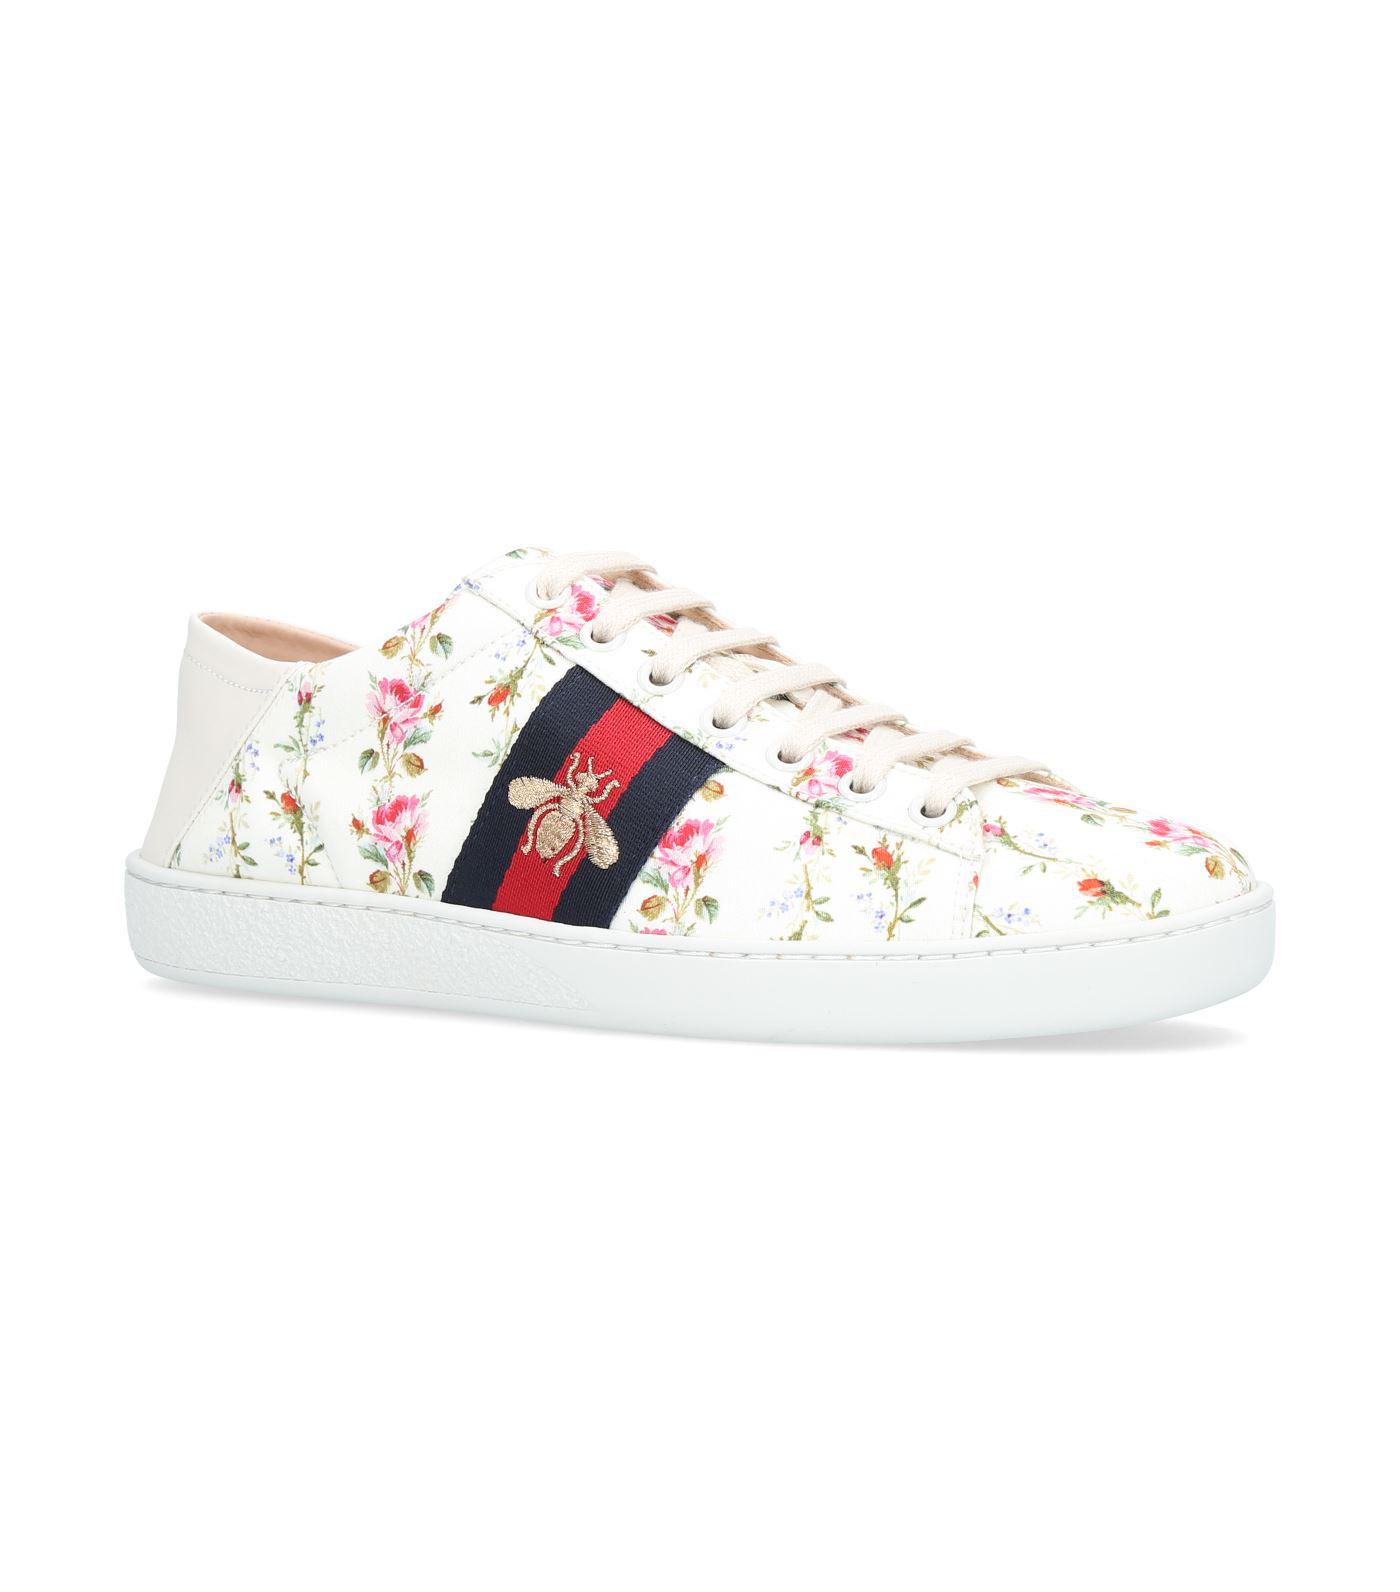 Gucci Rubber Ace Rose Print Low-top Sneakers in White - Lyst